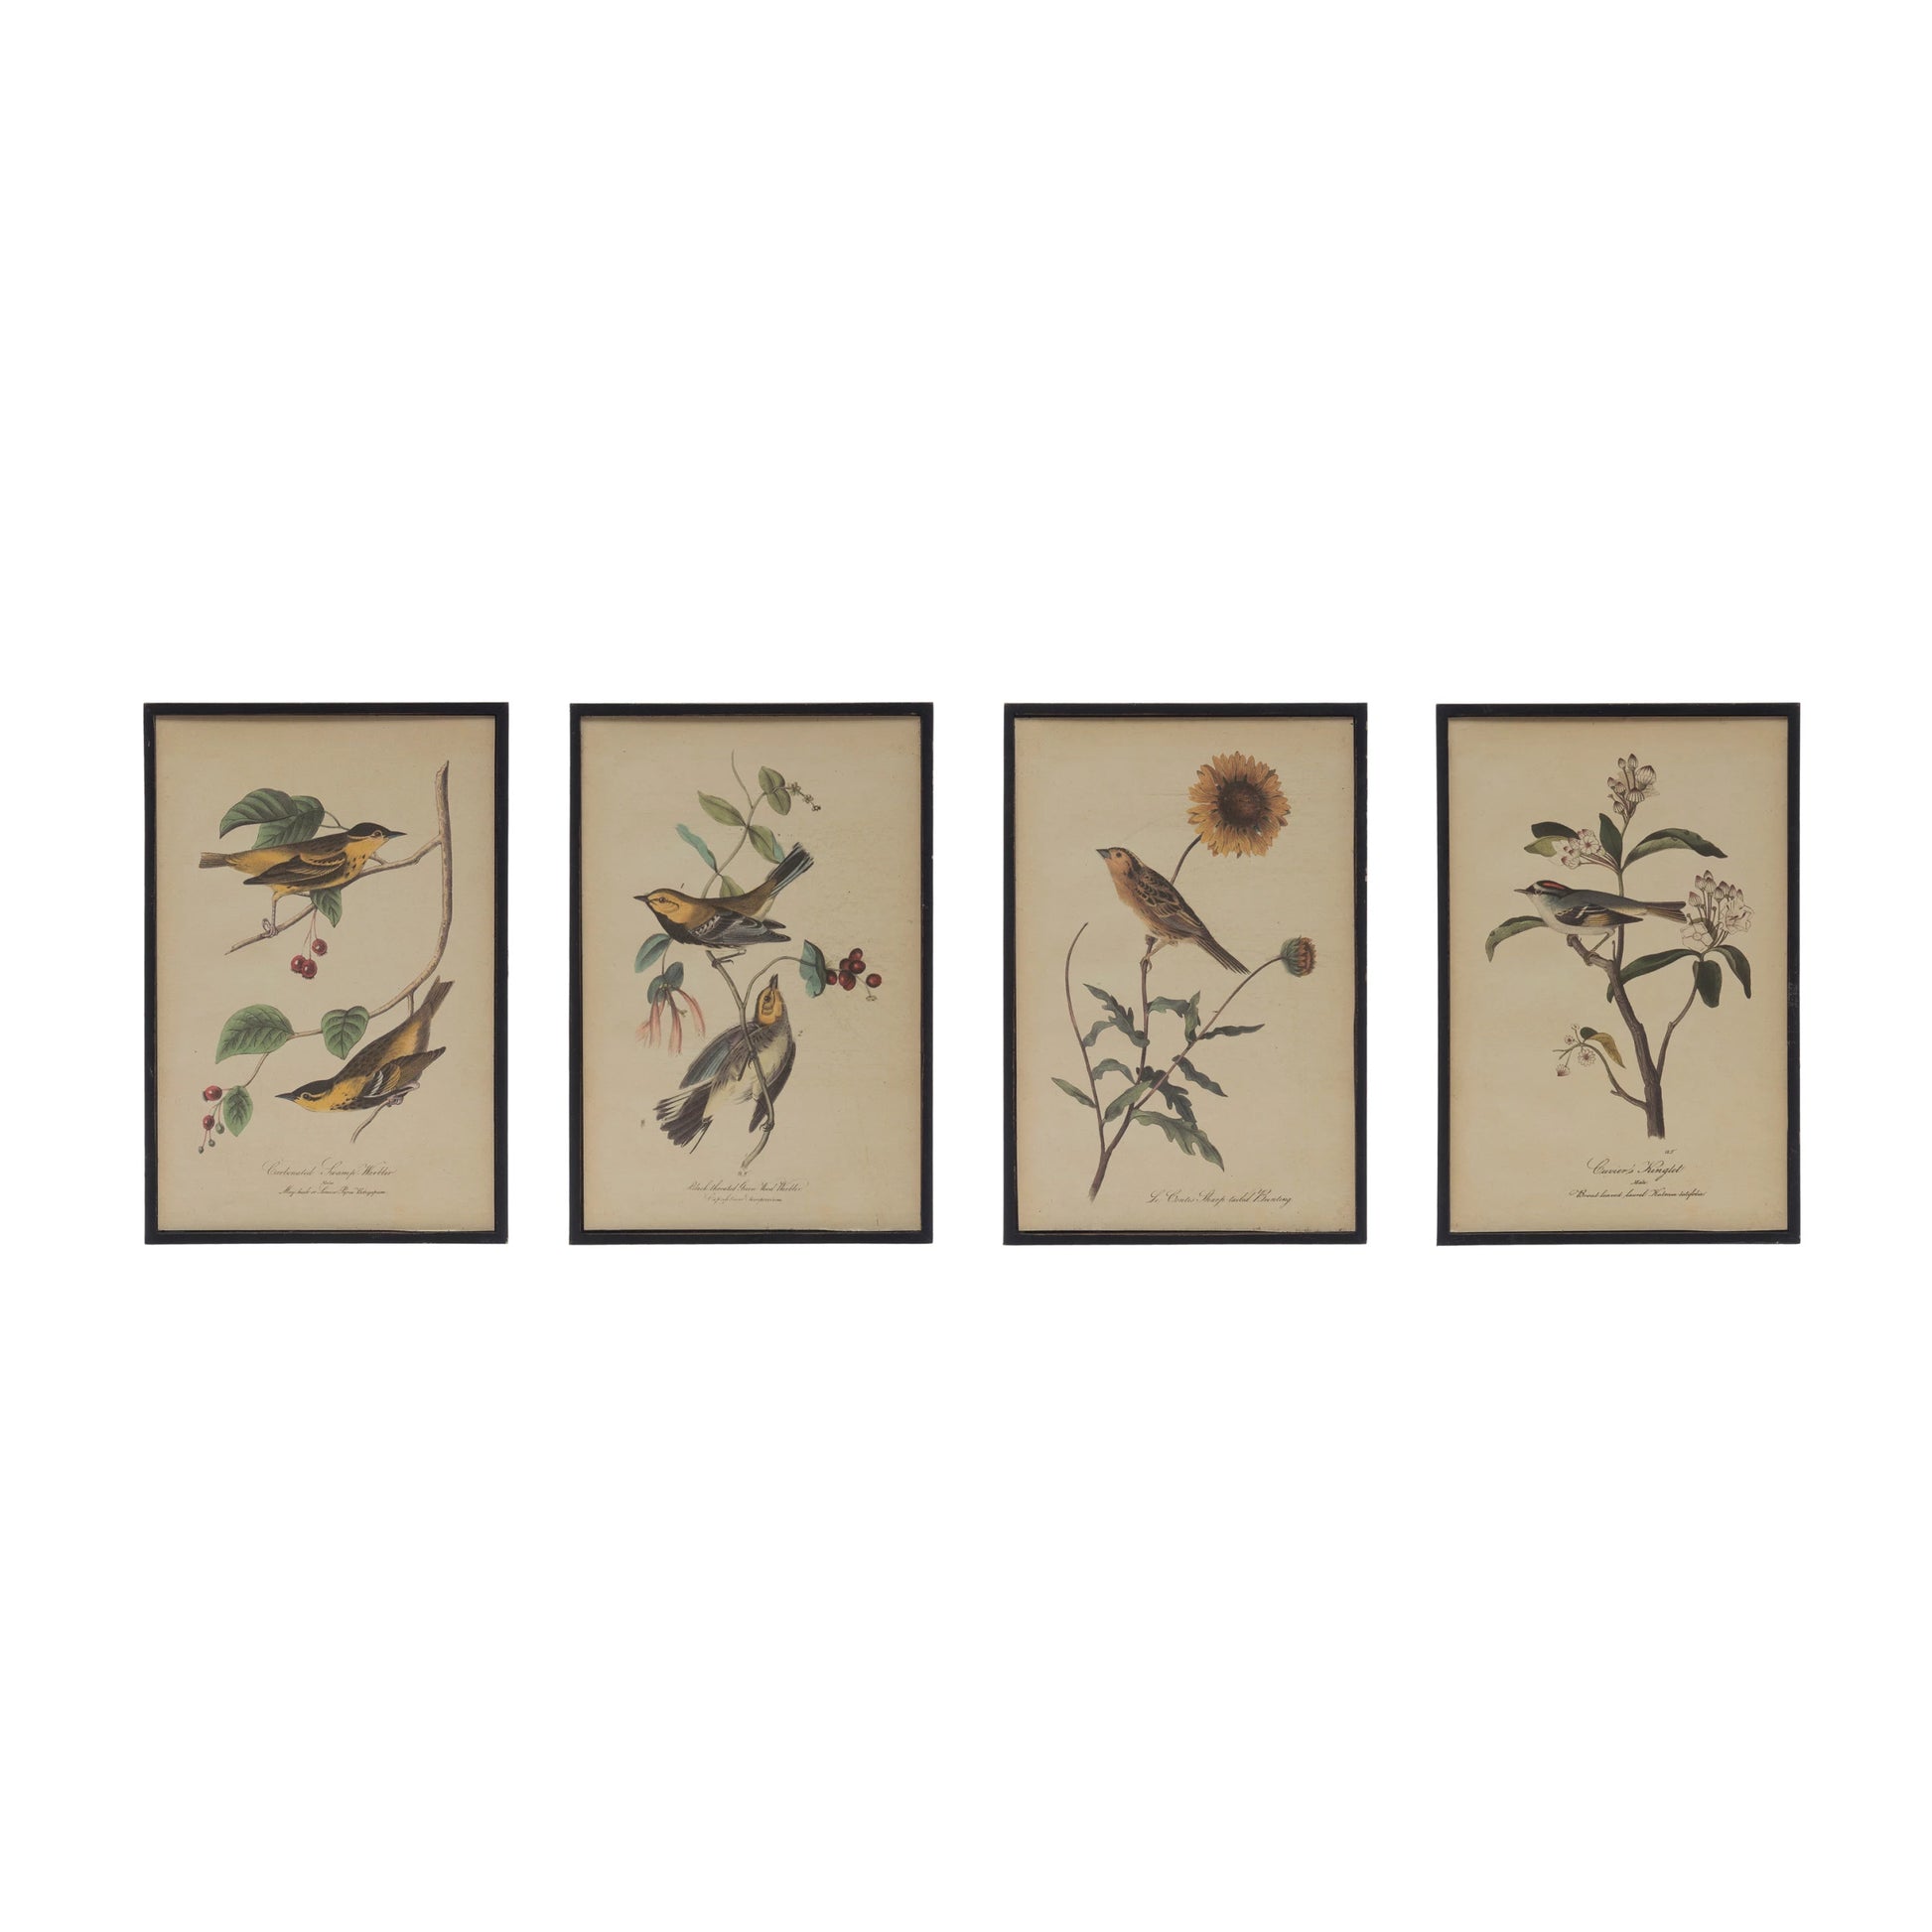 all four style of bird and flower framed wall art displayed in a row against a white background